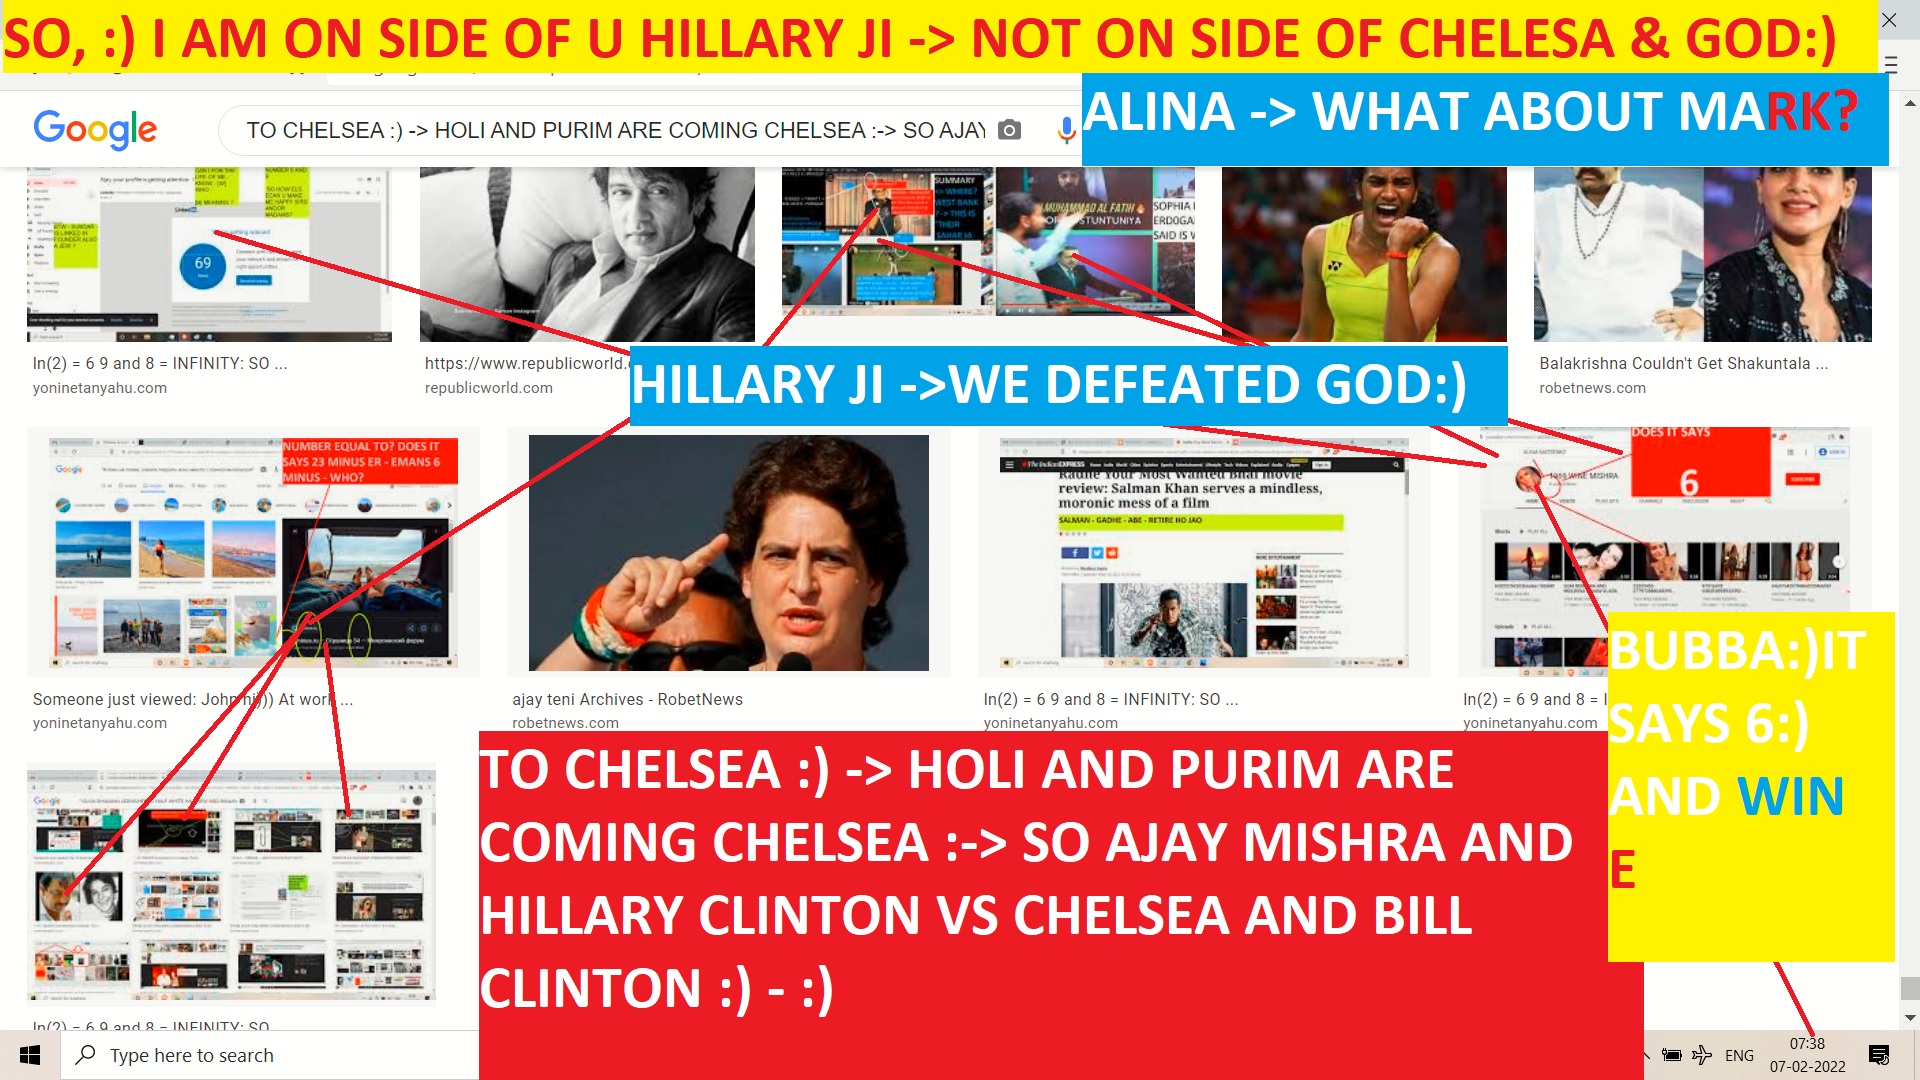 TO CHELSEA HOLI AND PURIM ARE COMING CHELSEA SO AJAY MISHRA AND HILLARY CLINTON VS CHELSEA AND BILL CLINTON